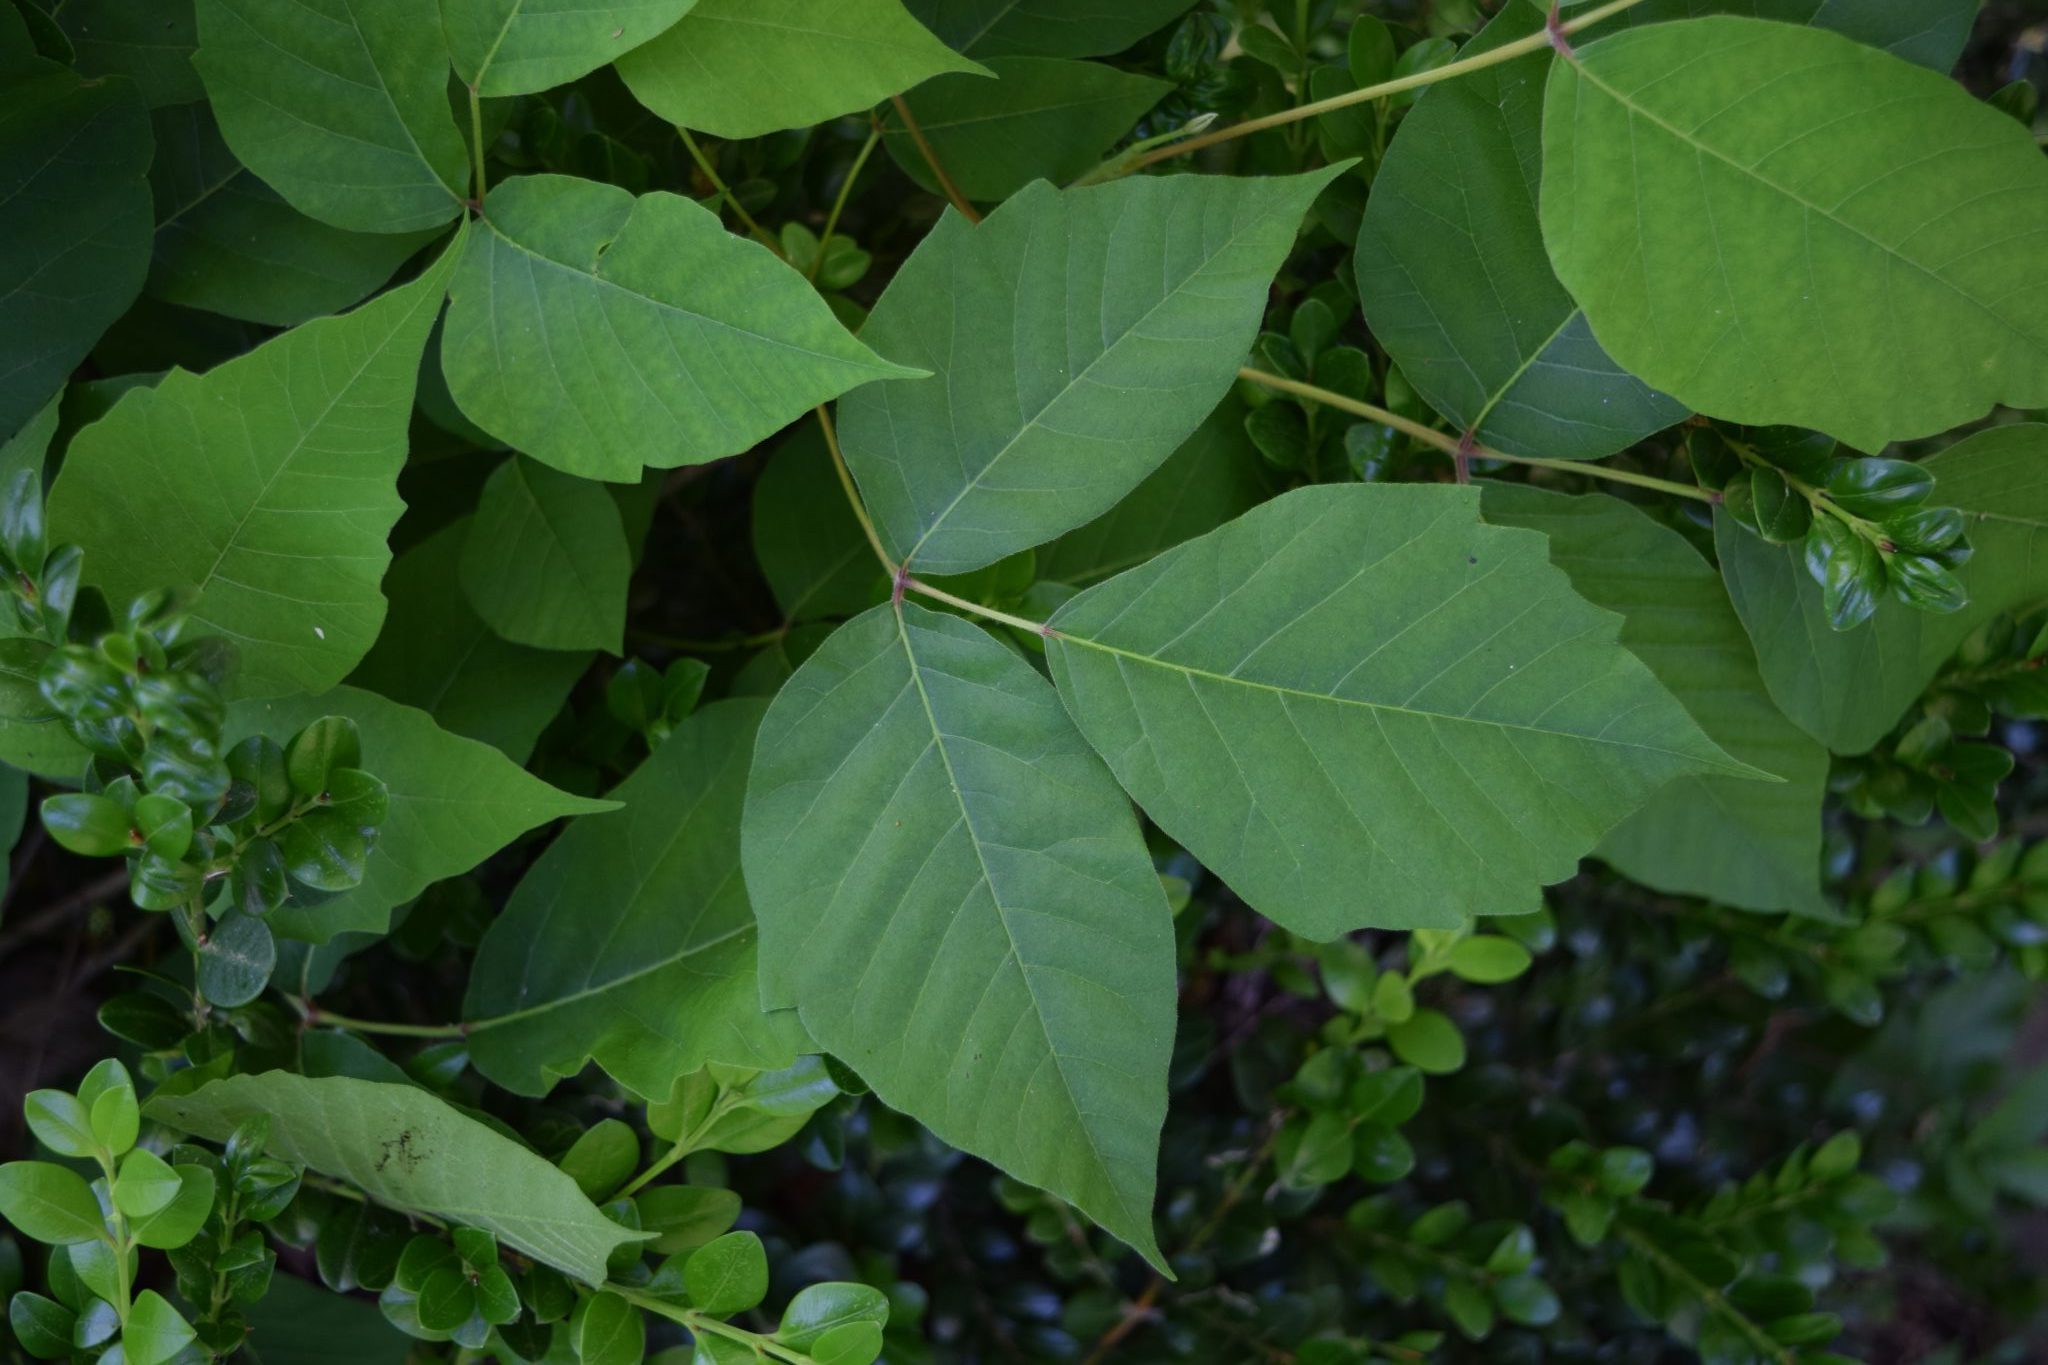 https://www.aces.edu/blog/topics/forestry/touch-me-nots-poison-ivy-poison-oak-and-poison-sumac/figure-1-poison-ivy/